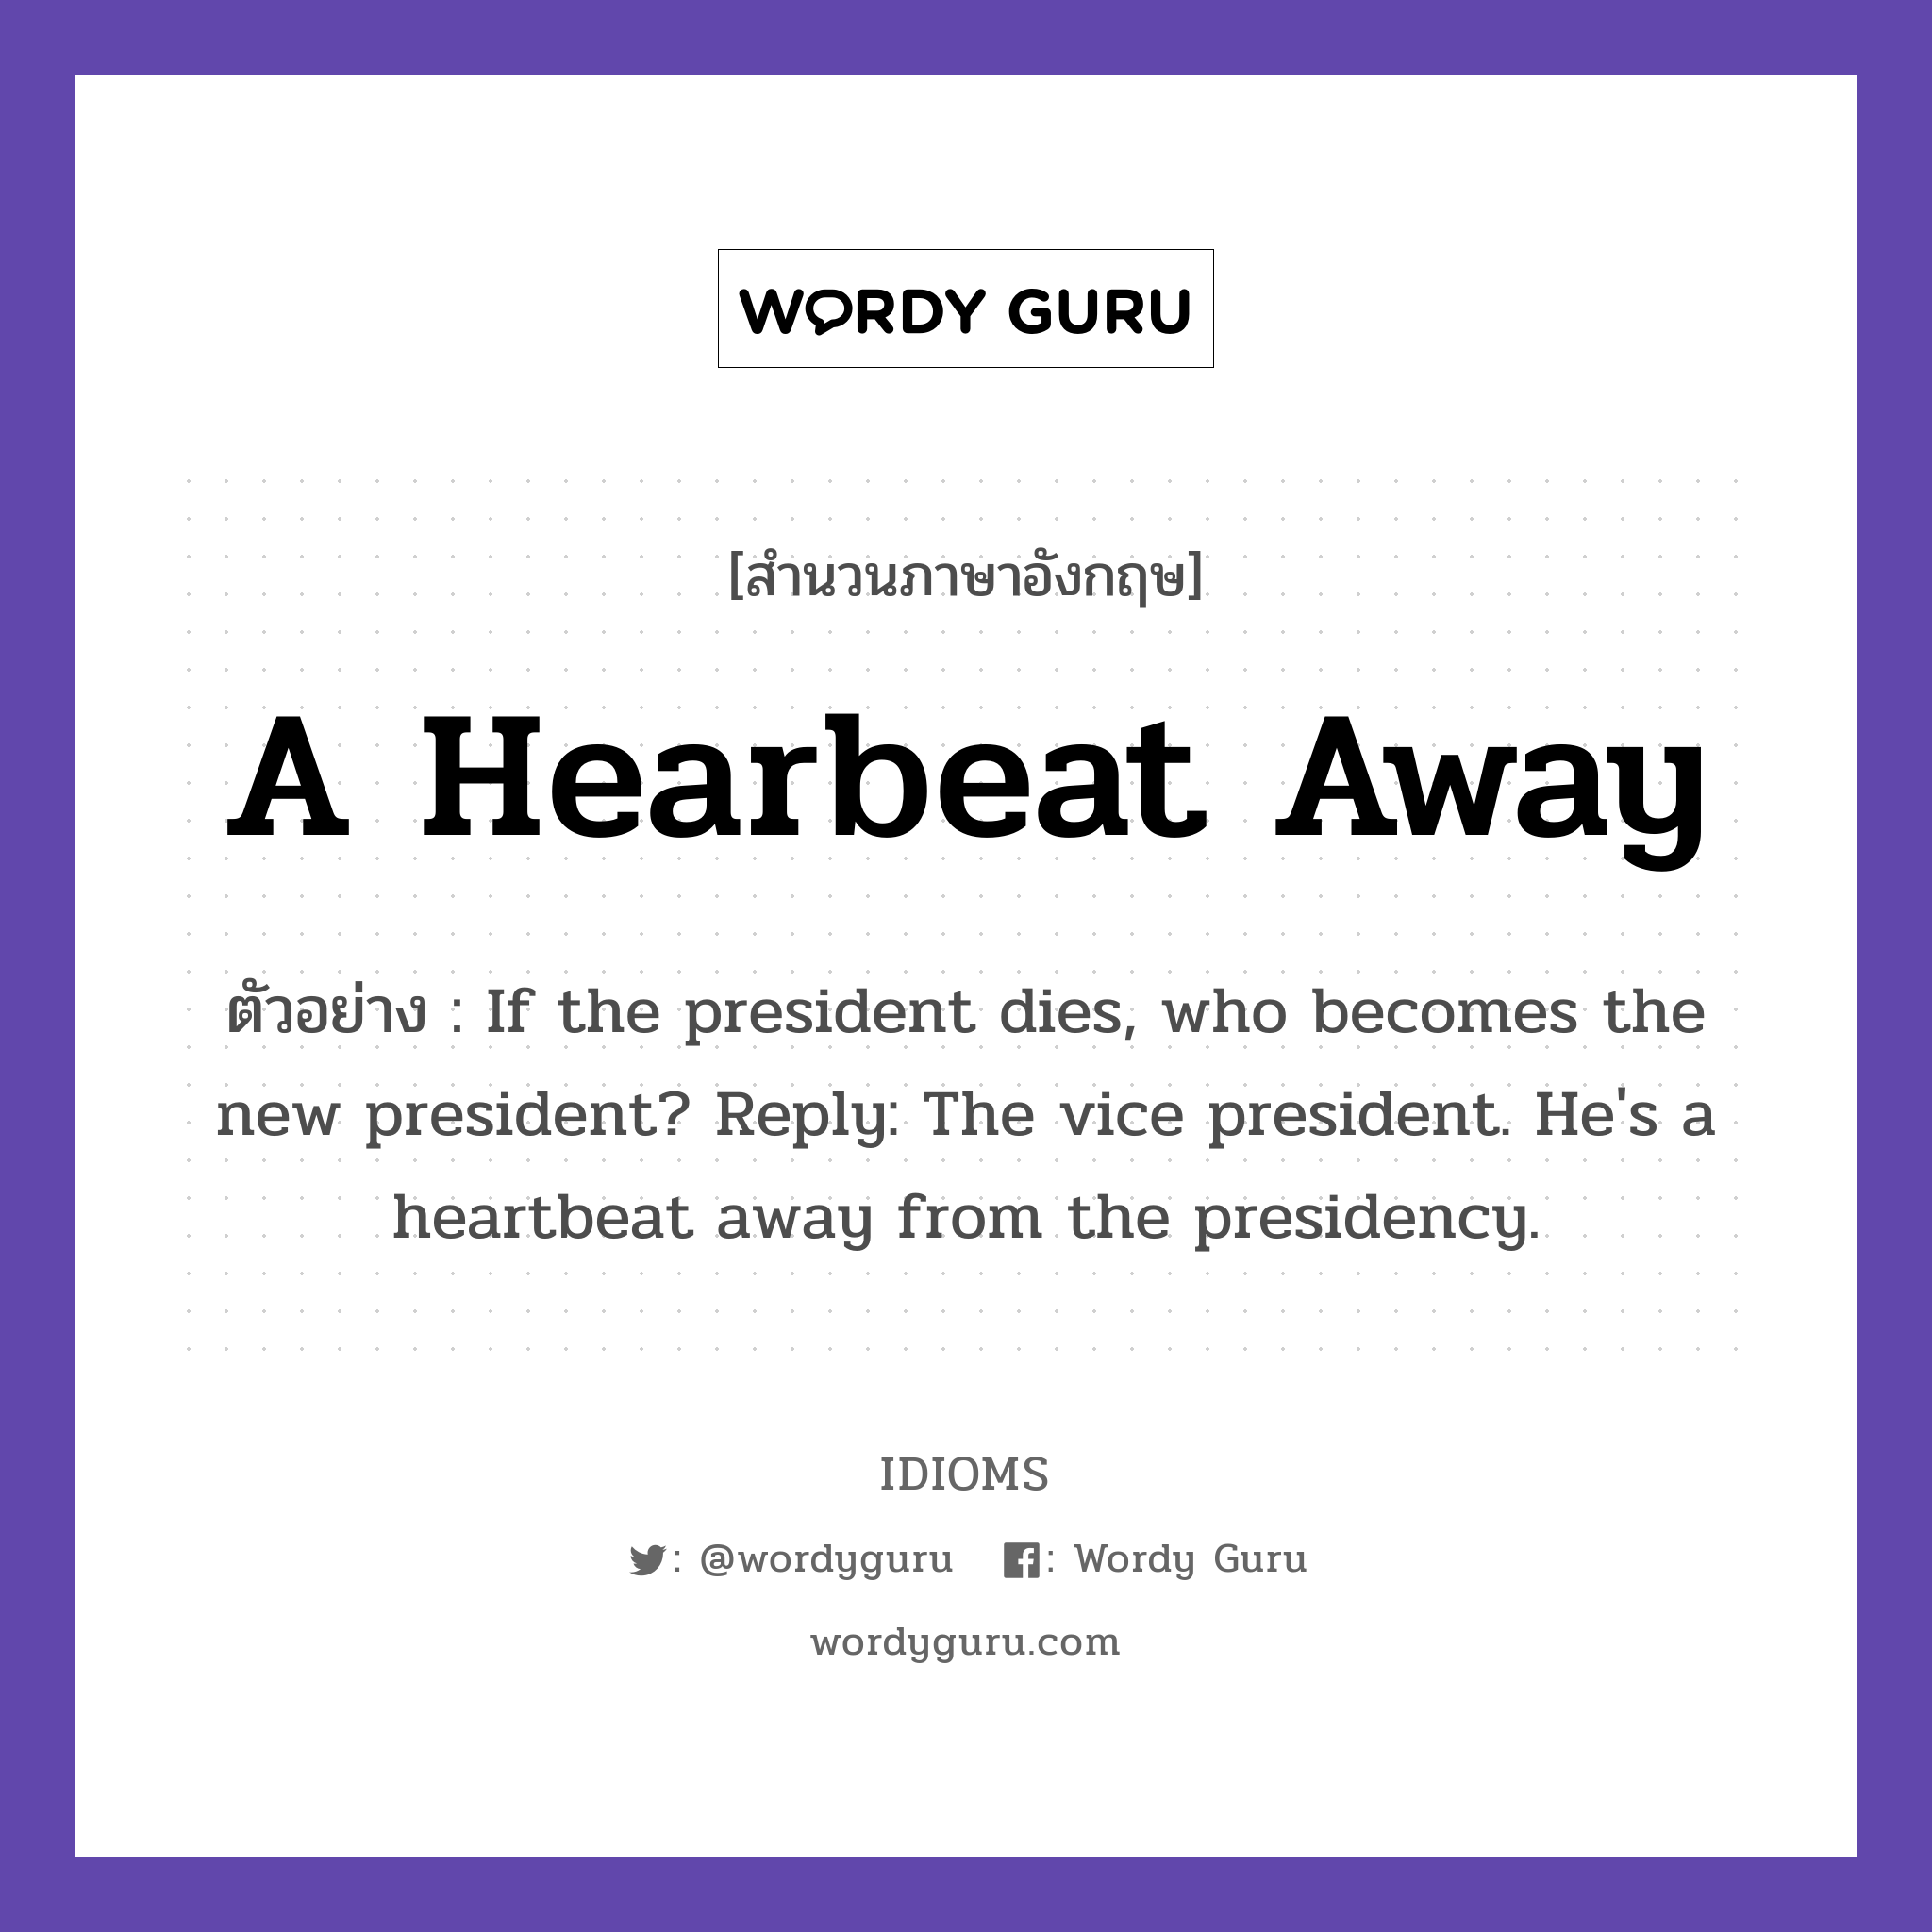 A Hearbeat Away แปลว่า?, สำนวนภาษาอังกฤษ A Hearbeat Away ตัวอย่าง If the president dies, who becomes the new president? Reply: The vice president. He's a heartbeat away from the presidency.